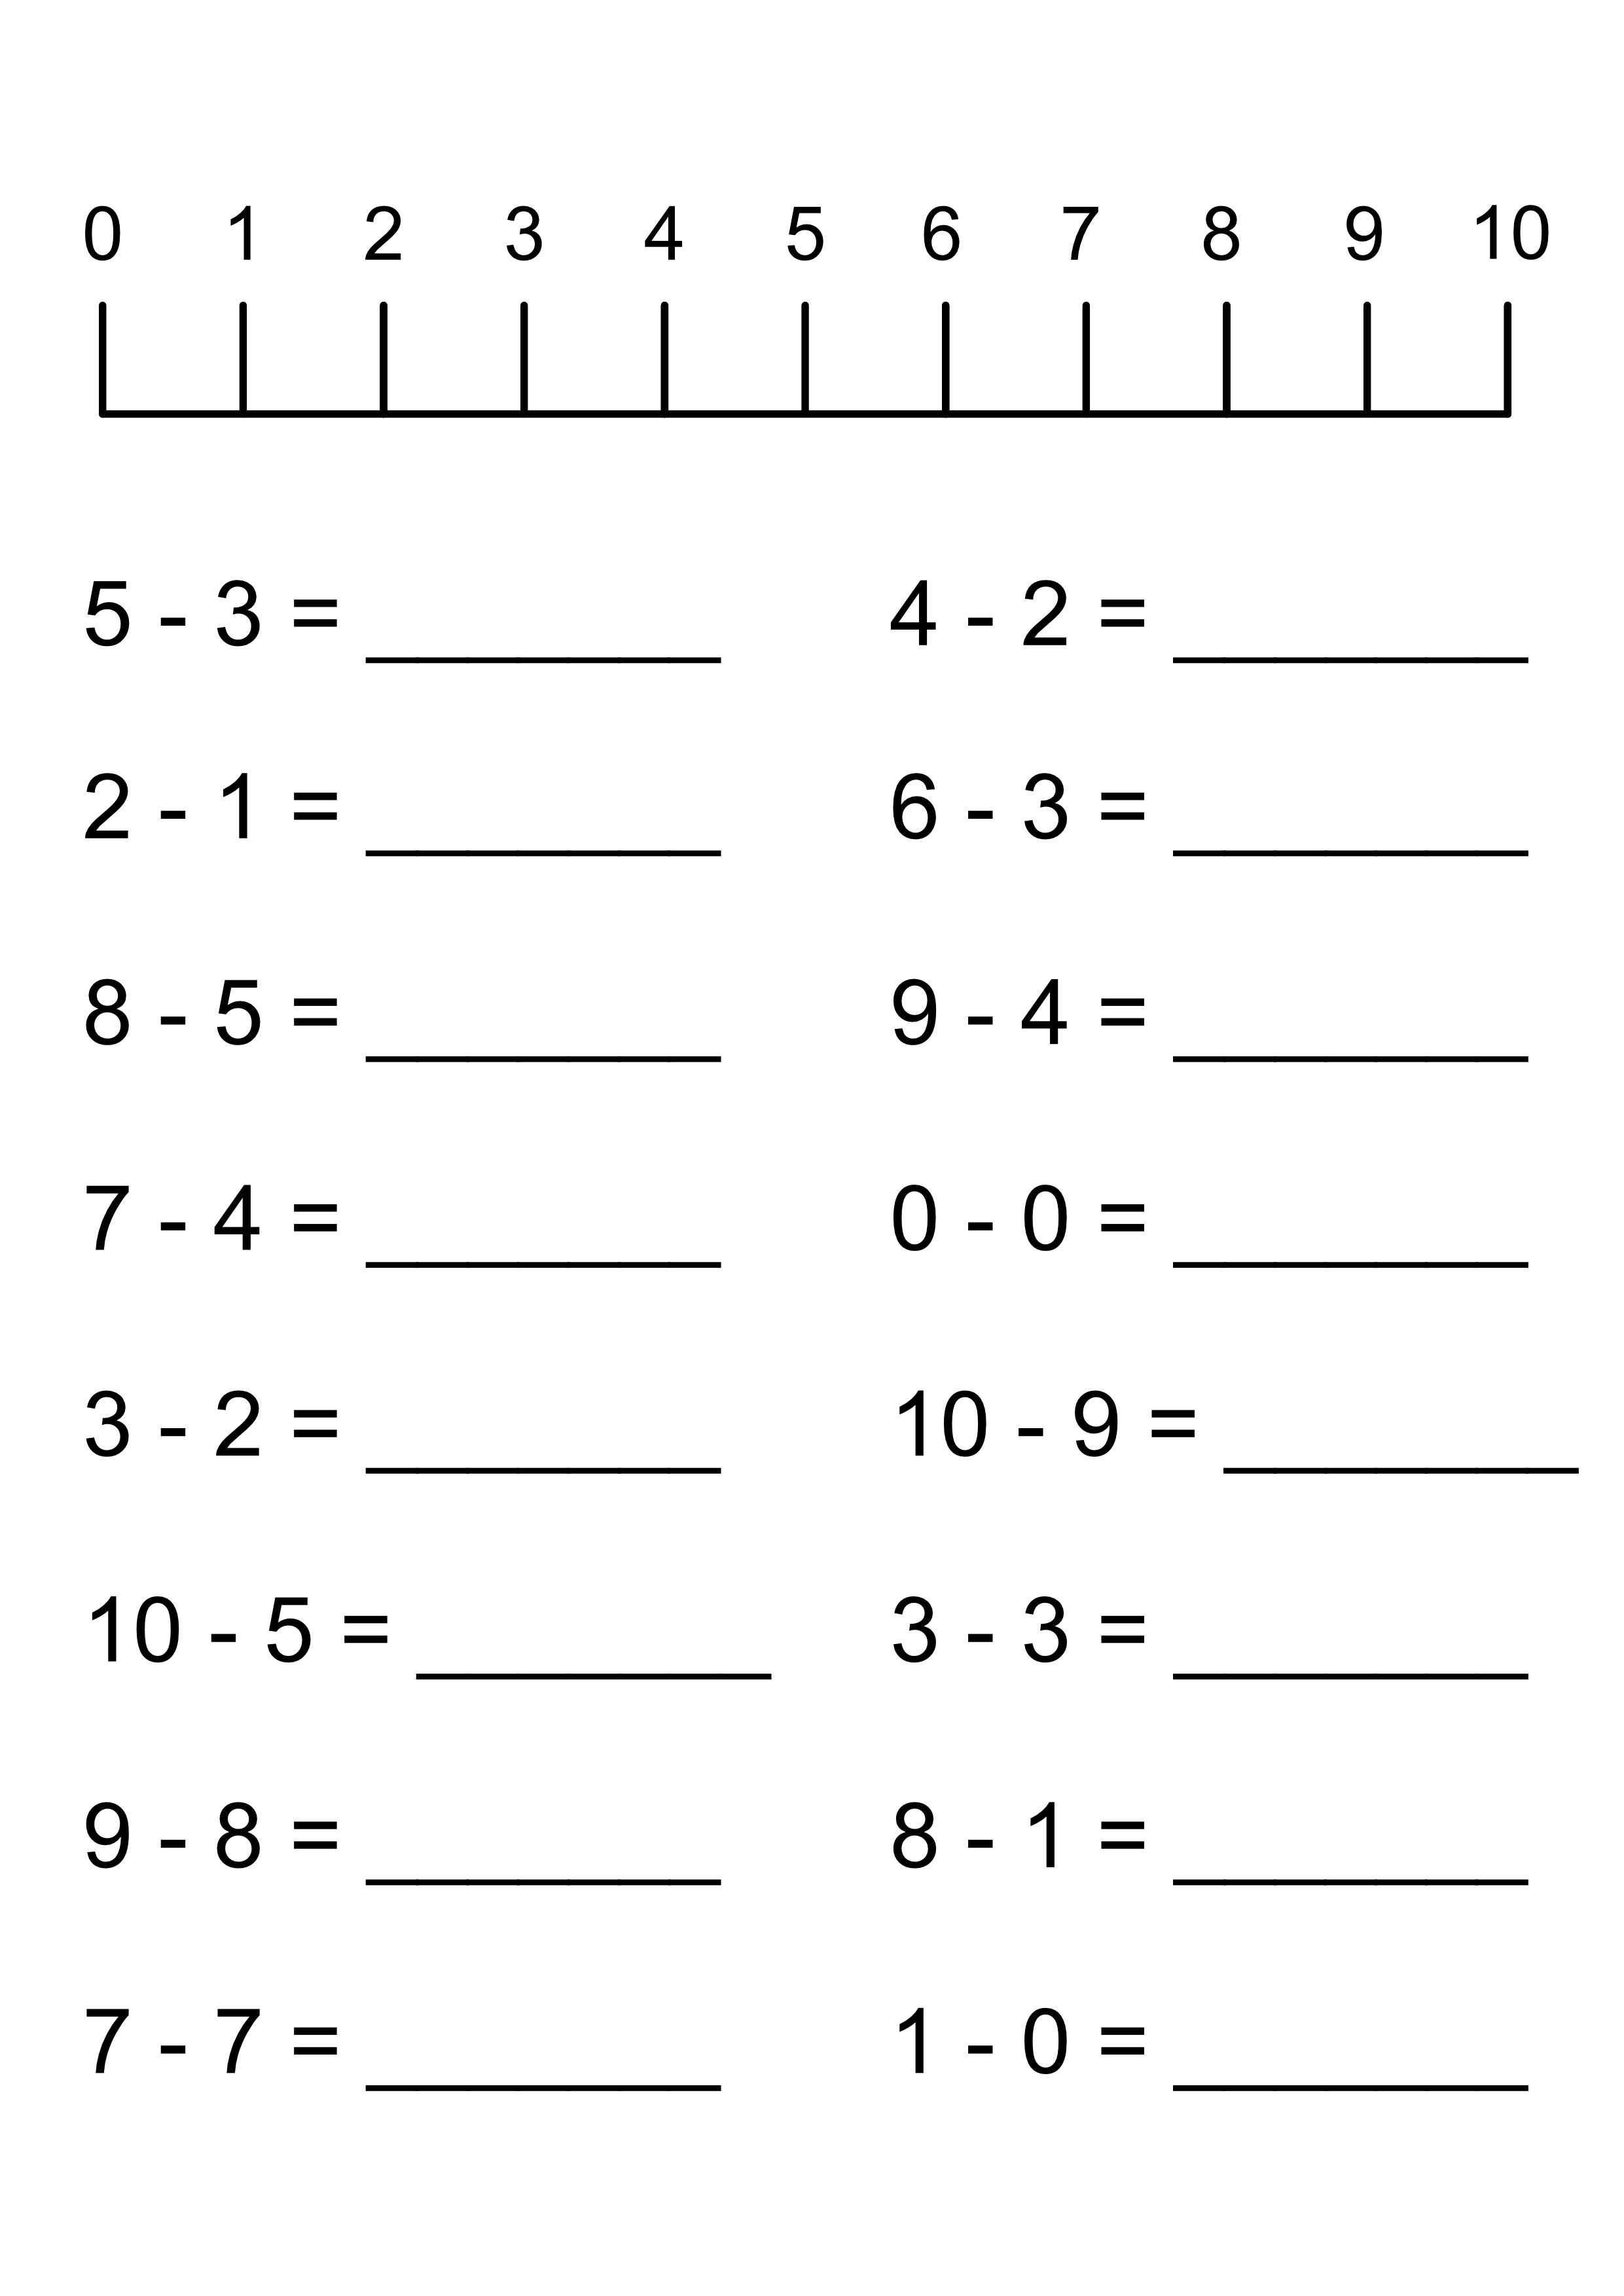 Printable Number Lines For Subtraction